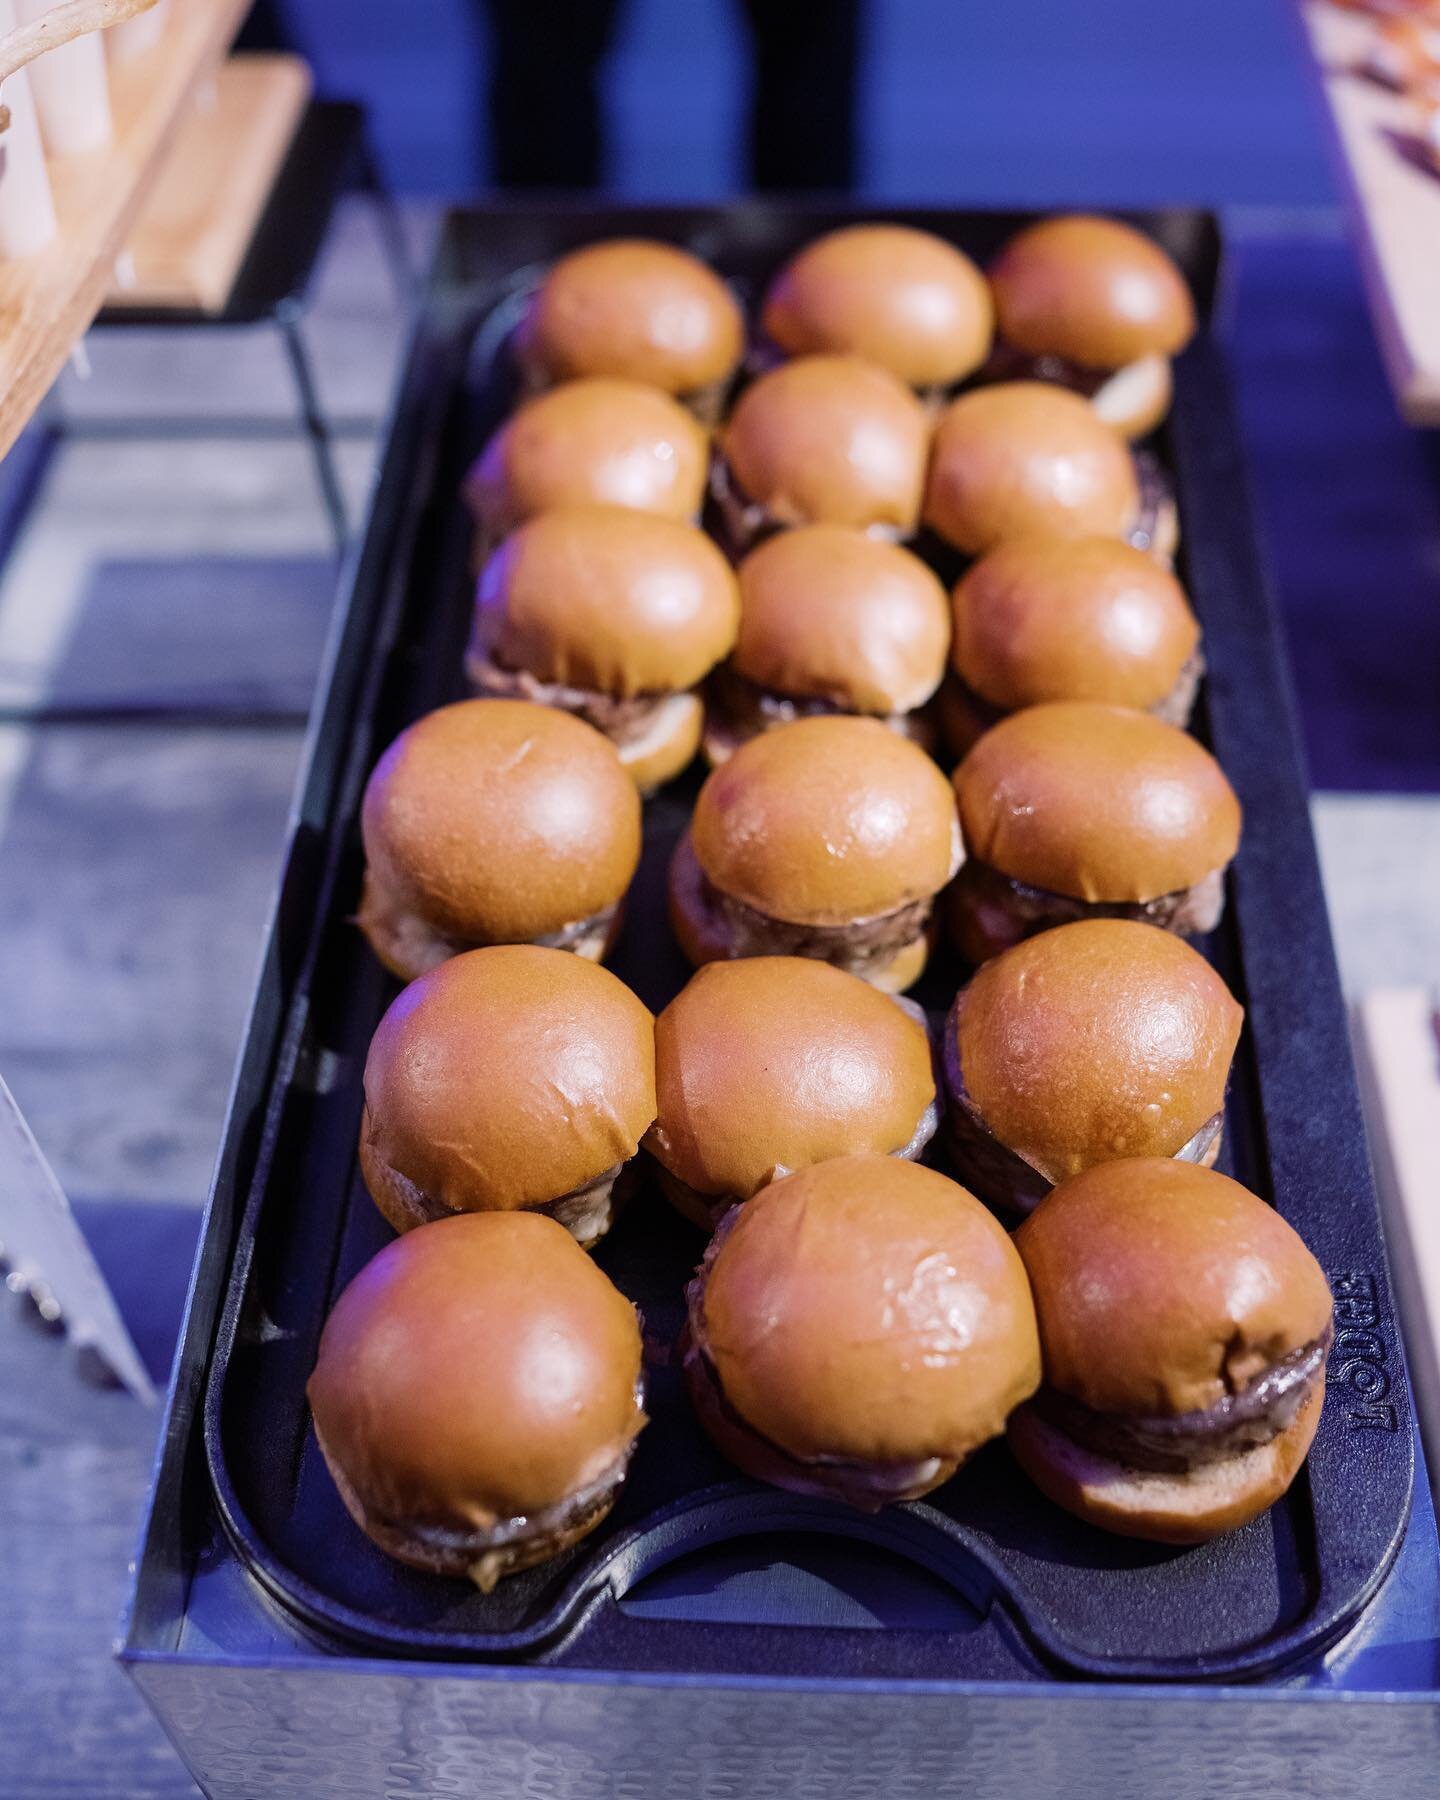 If you didn&rsquo;t have a slider bar &hellip; did you even have an event? ➡️

#nycevents #nonprofitevents 

#foodie #instafood #instayum #sliders #frenchfries #comfortfood